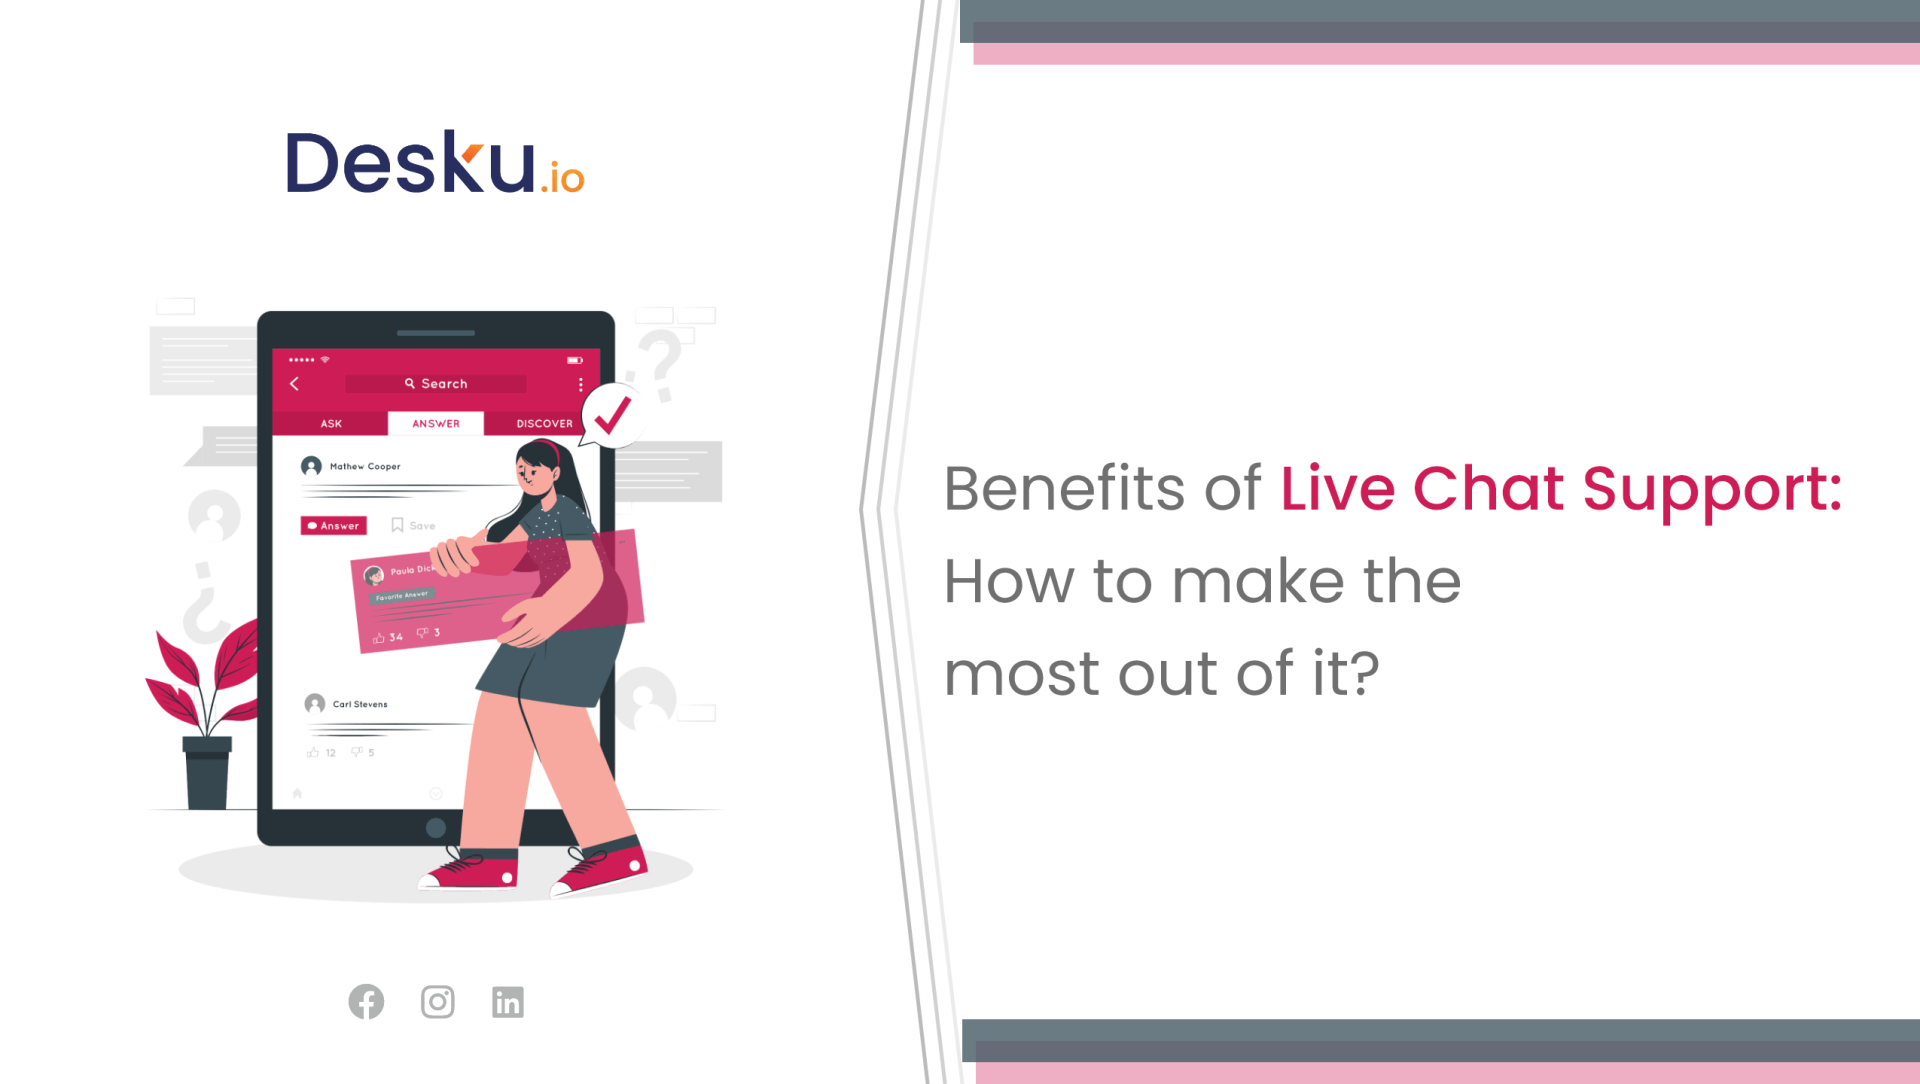 Benefits of Live Chat Support: How to make the most out of it?